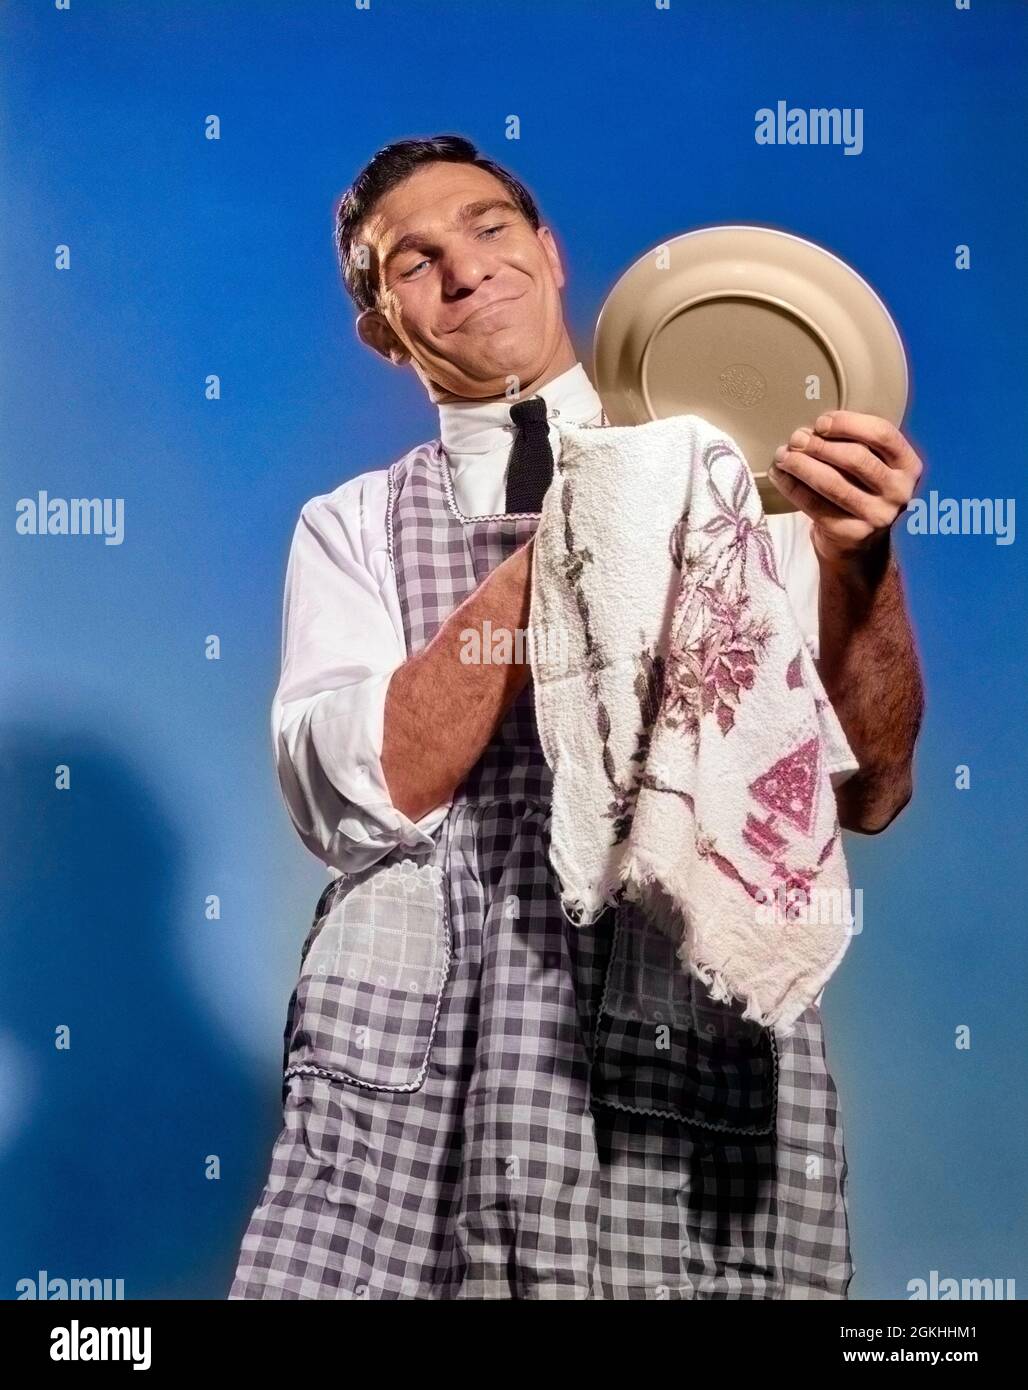 1960s 1950s SMILING MAN HUSBAND IN APRON WASHING AND DRYING DISHES IN  KITCHEN - s10163c DEB001 HARS OLD FASHION 1 TOWEL DISH ASSISTANT LIFESTYLE  STUDIO SHOT HOME LIFE COPY SPACE HALF-LENGTH DRY